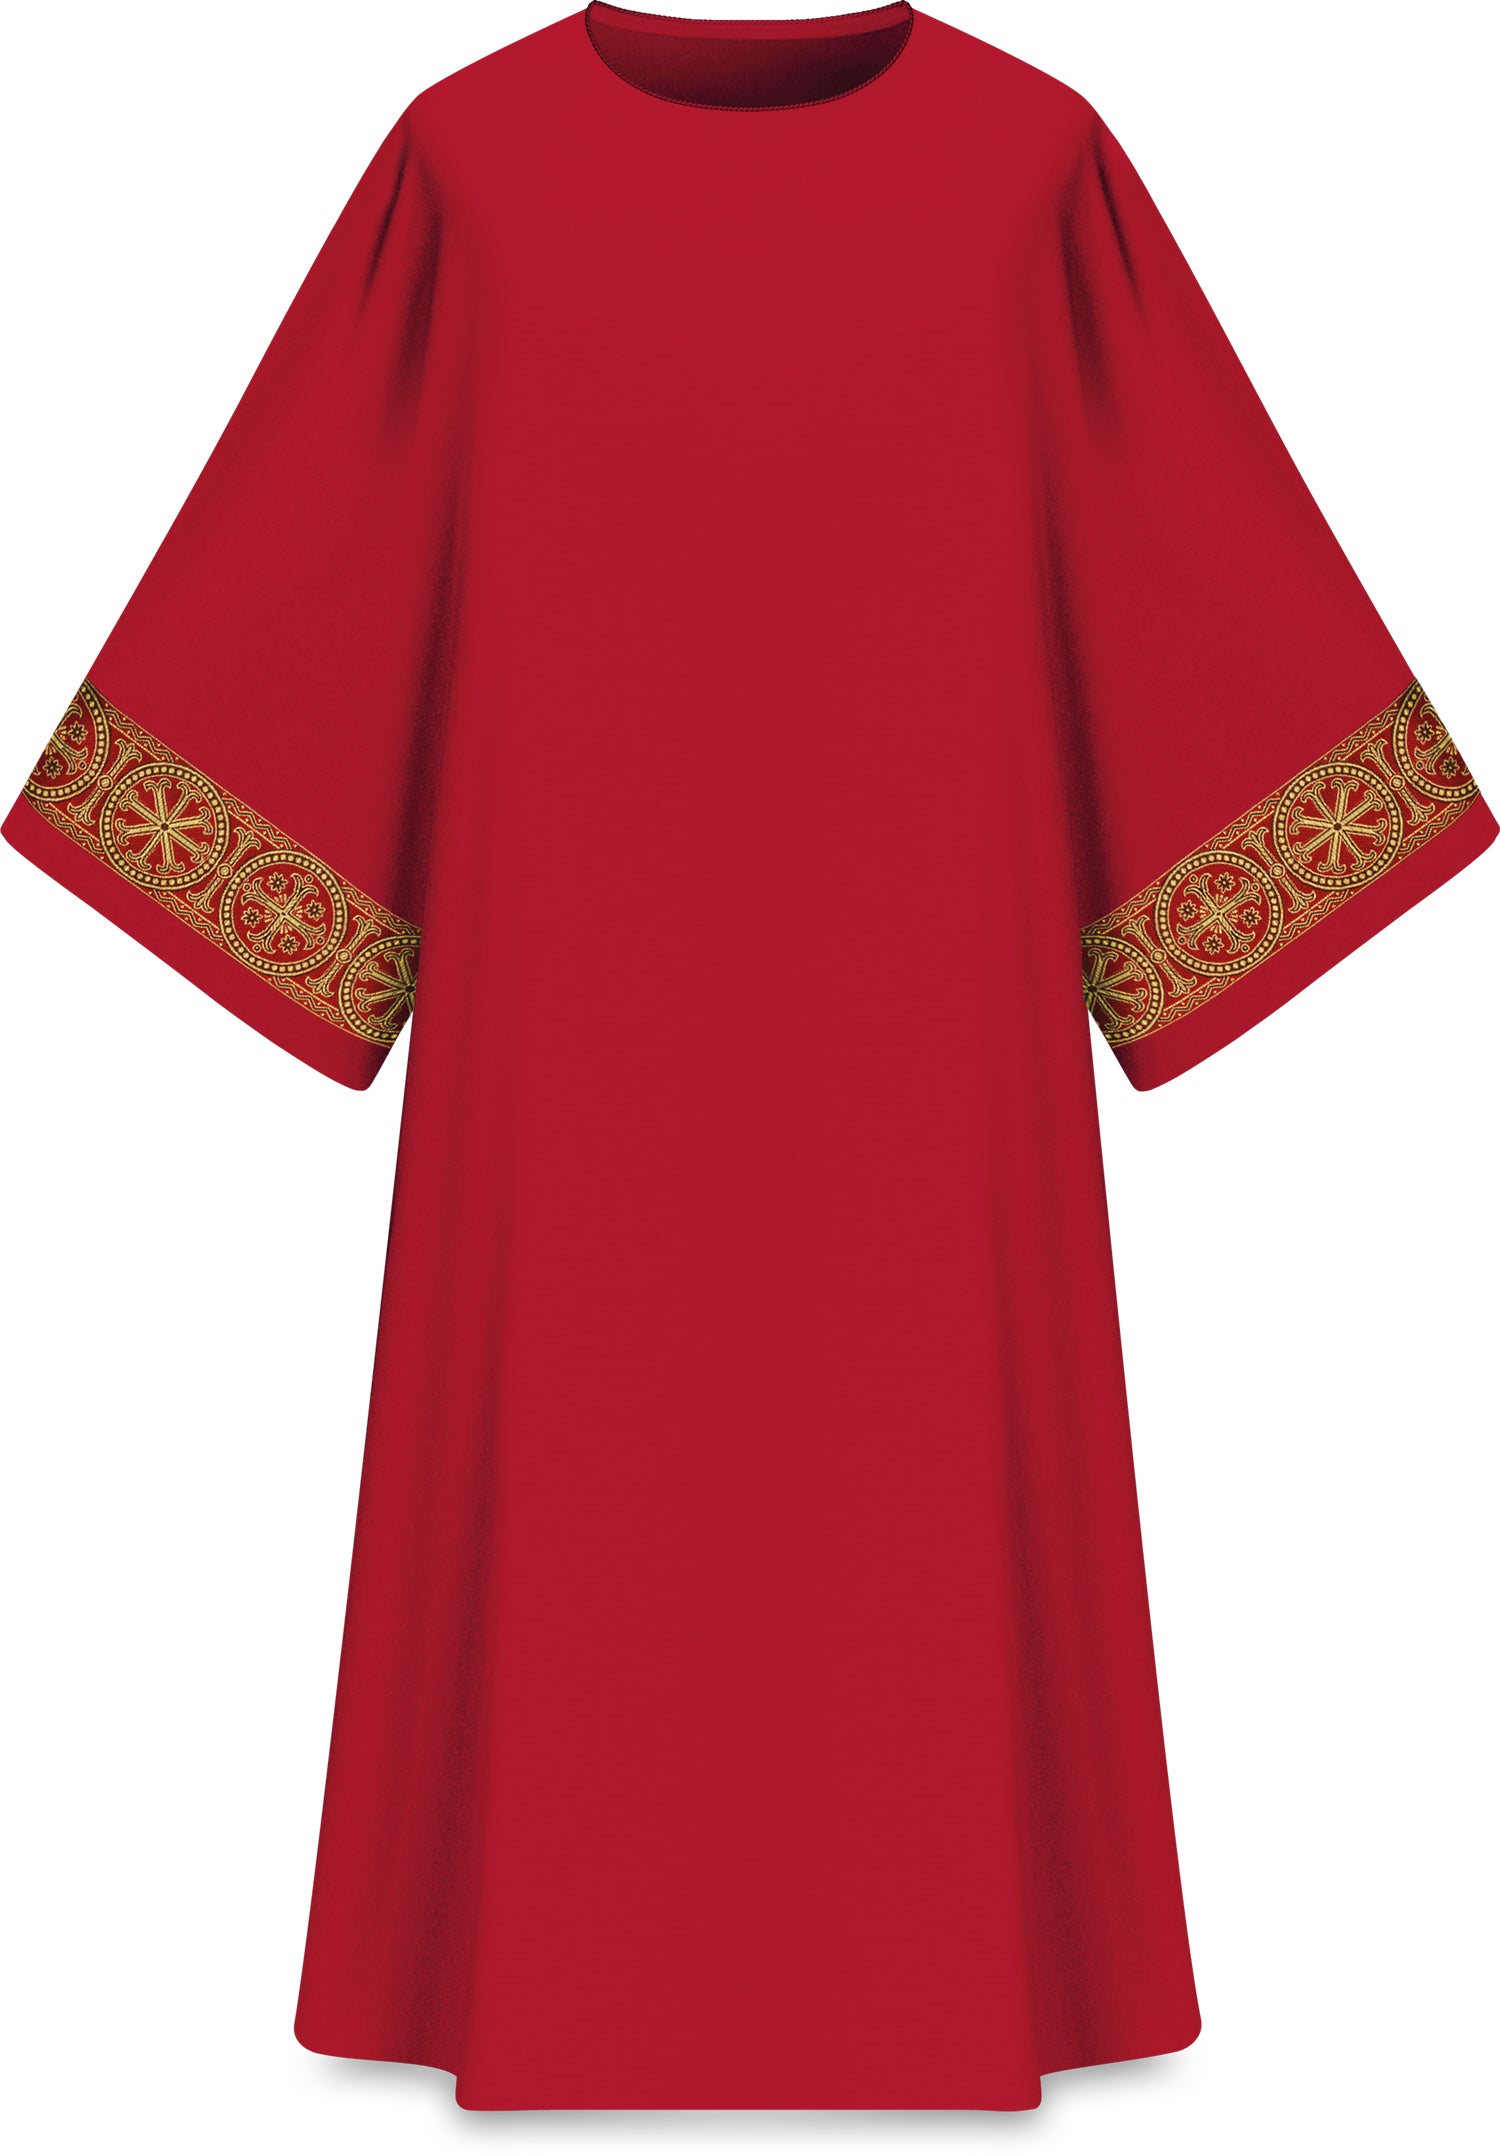 Dalmatic with Woven Orphrey | ASSISI by SLABBINCK